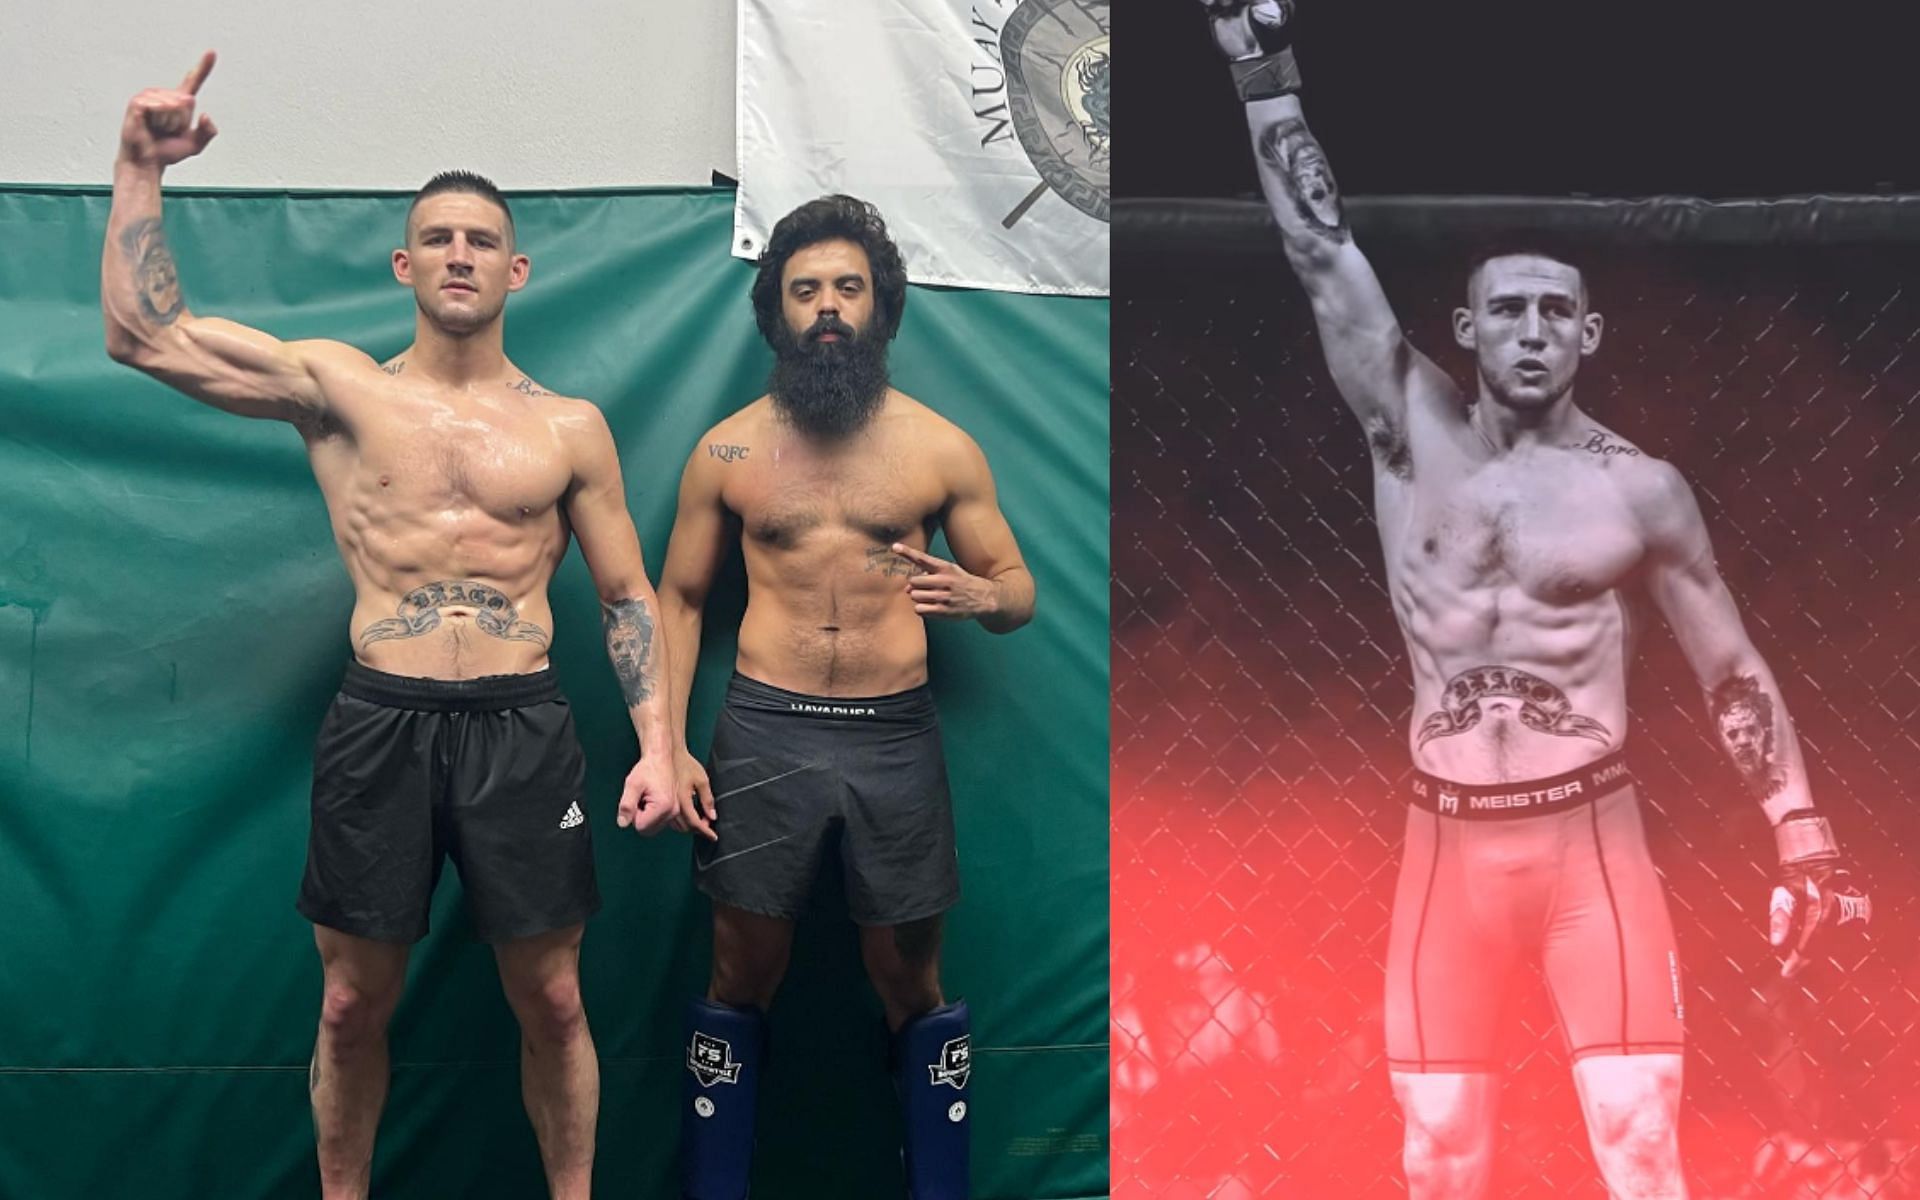 Professional MMA fighter Jimmy Drago and his coach (left) and Drago (right) [Images courtesy: @jimmy_drago02 on Instagram]